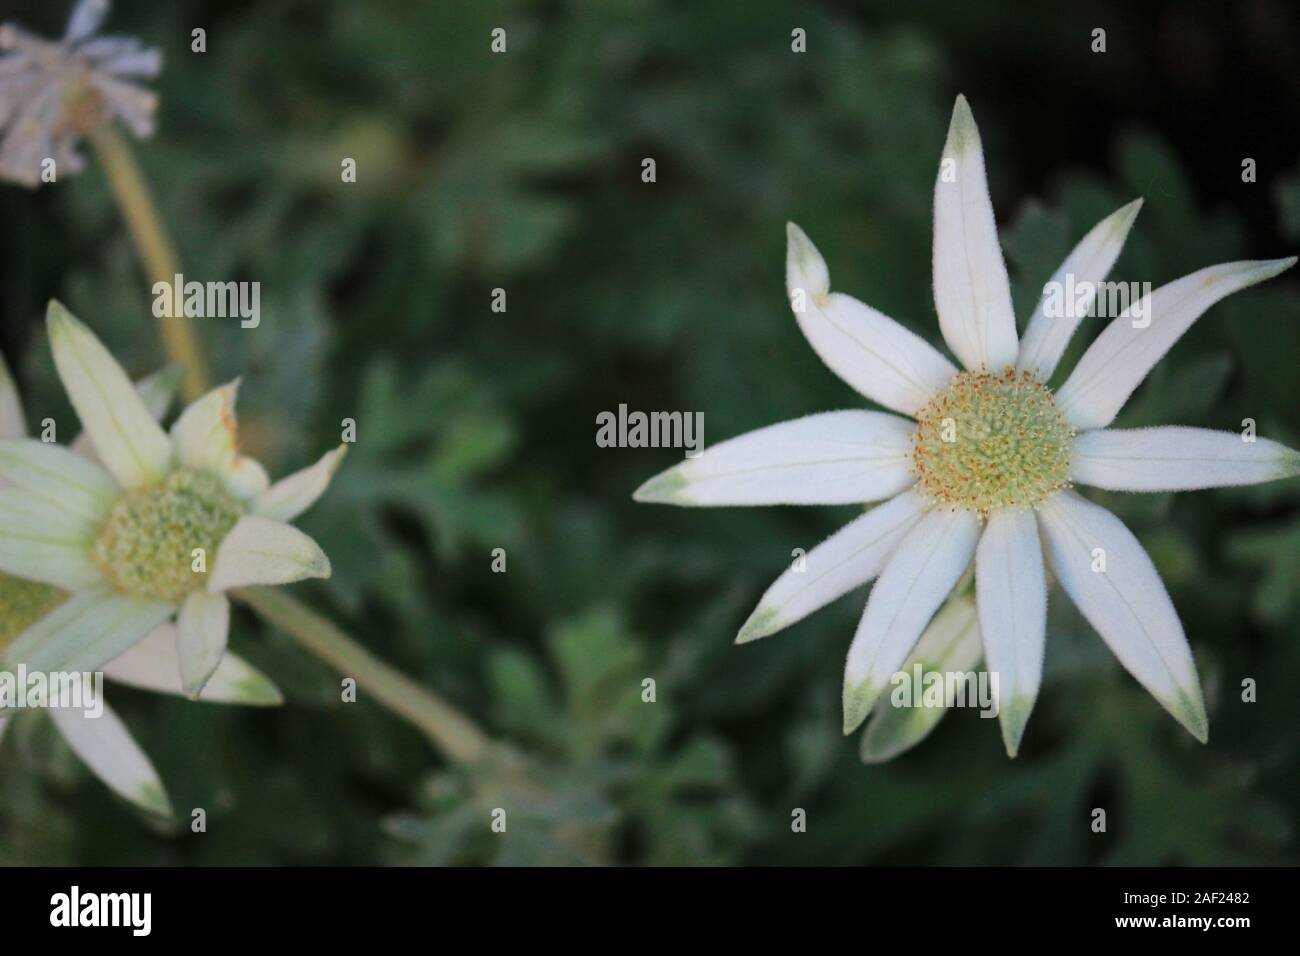 White flowers of Actinotus helianthi called 'Flannel flower' blooming in the flowerbed of winter Stock Photo